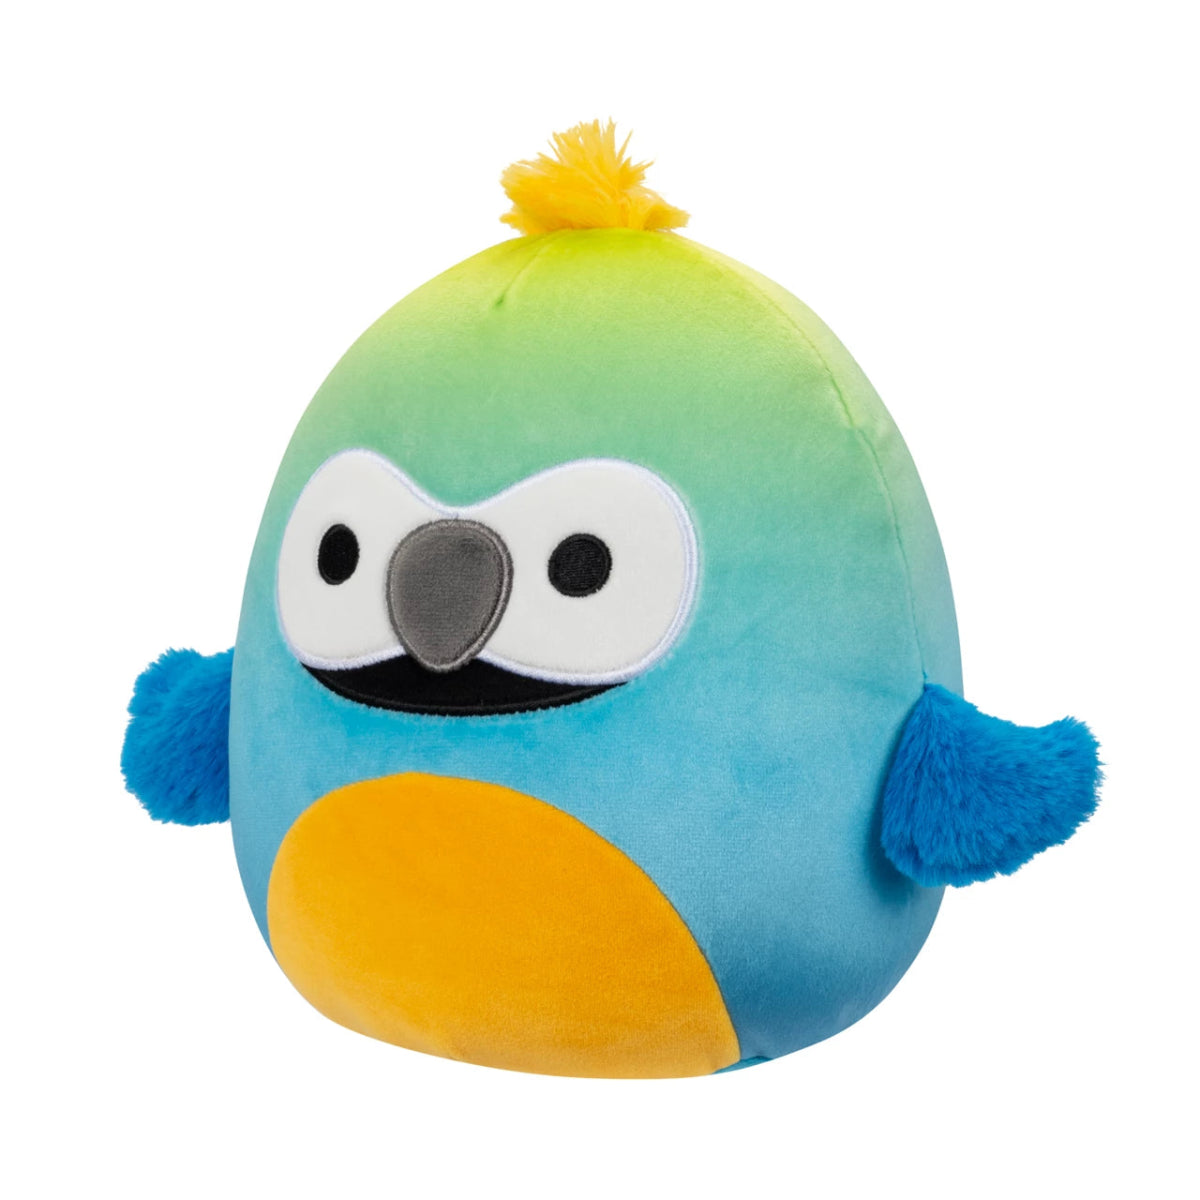 7.5" Baptise the Blue Macaw Squishmallows Plush - Inspire Newquay